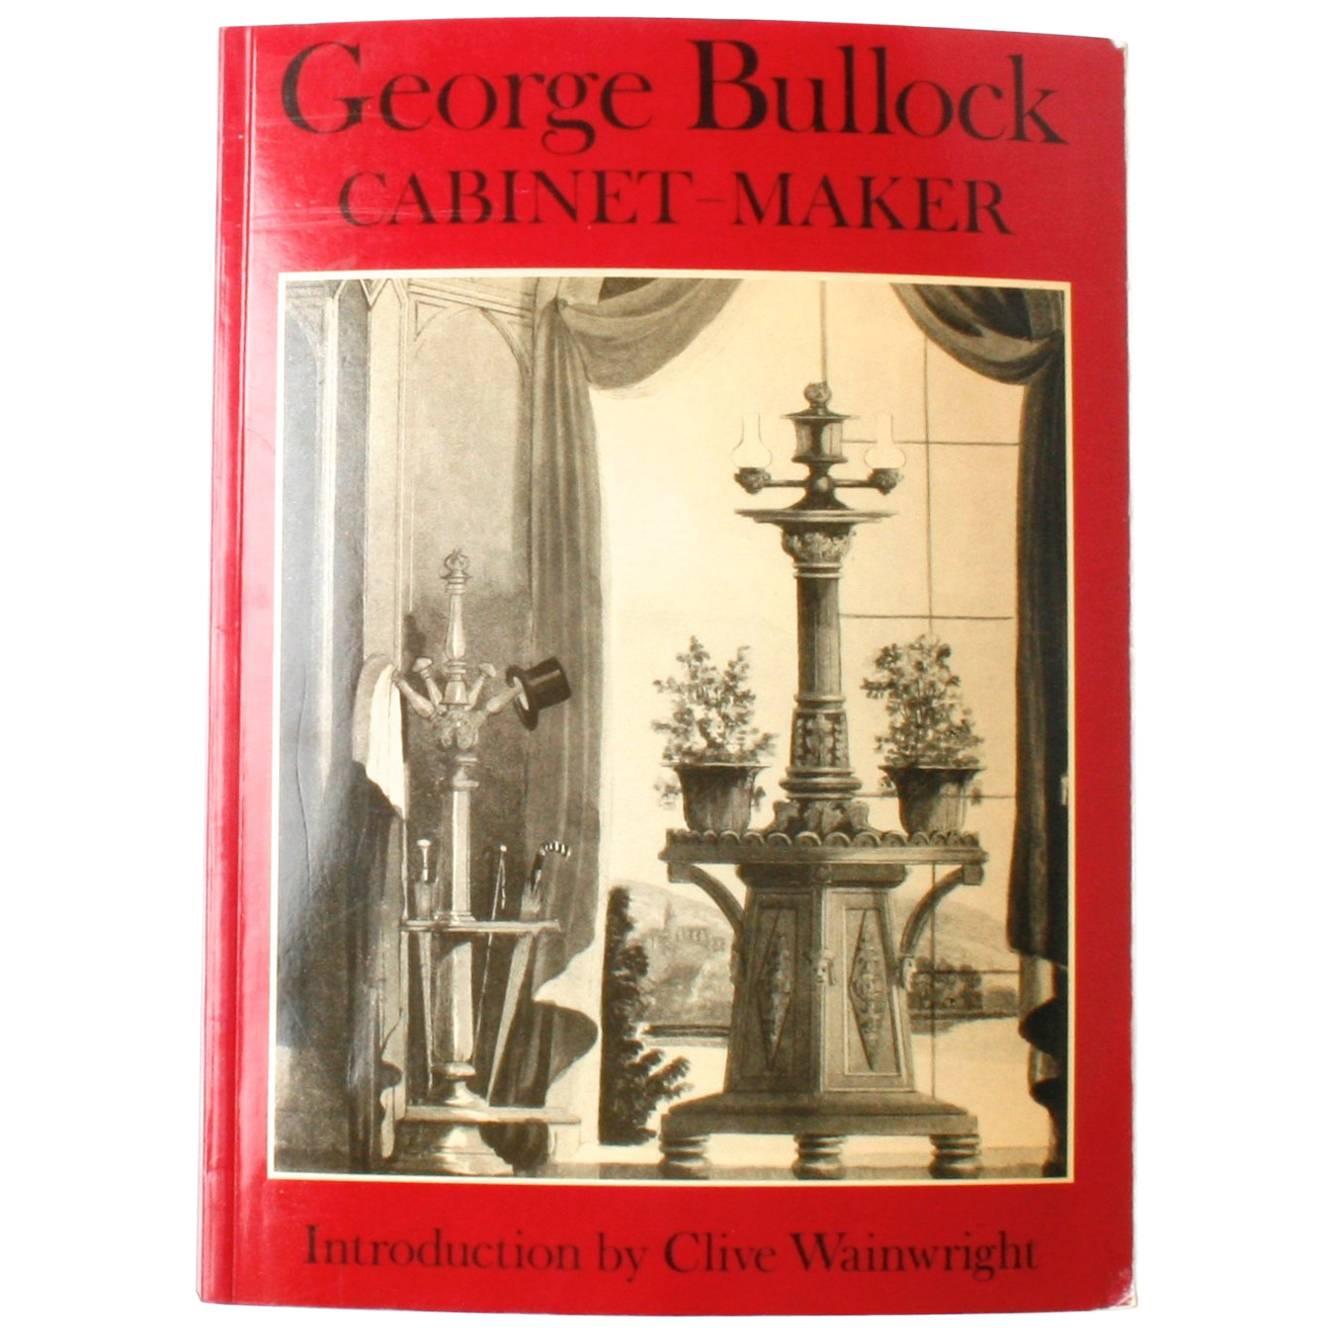 George Bullock, Cabinet-Maker, First Edition